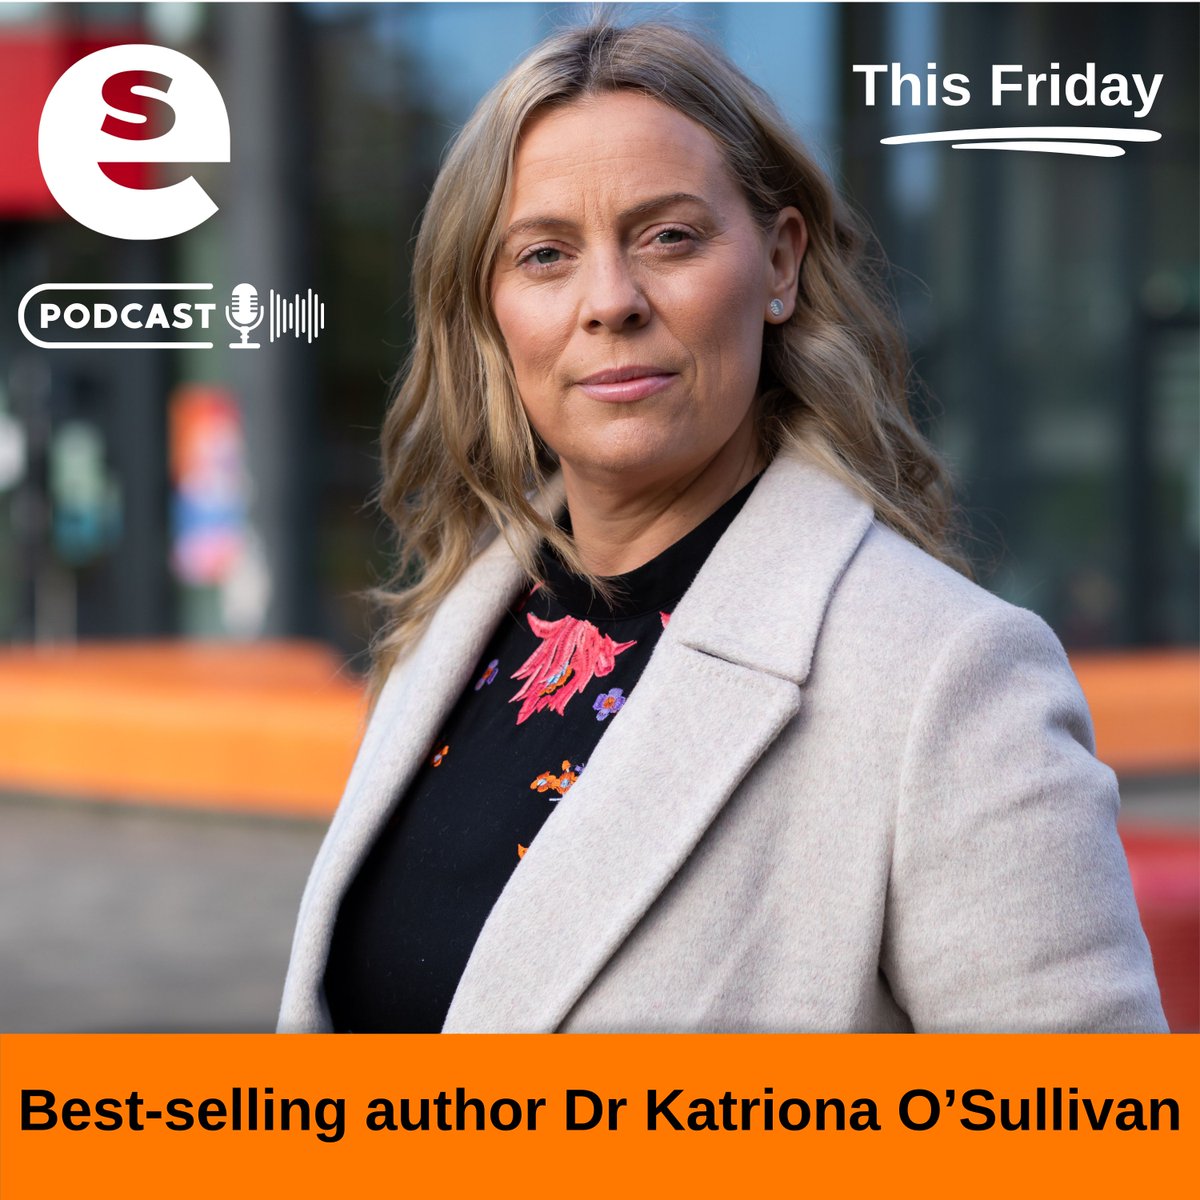 In this Friday's 'The Learning Conversations' podcast with Chief Executive, Gillian Hamilton, Dr Katriona O'Sullivan shares her remarkable journey from unimaginable poverty and trauma to academic success. Subscribe here: podbean.com/site/podcatche… @GGillHHam1 @katrionaos